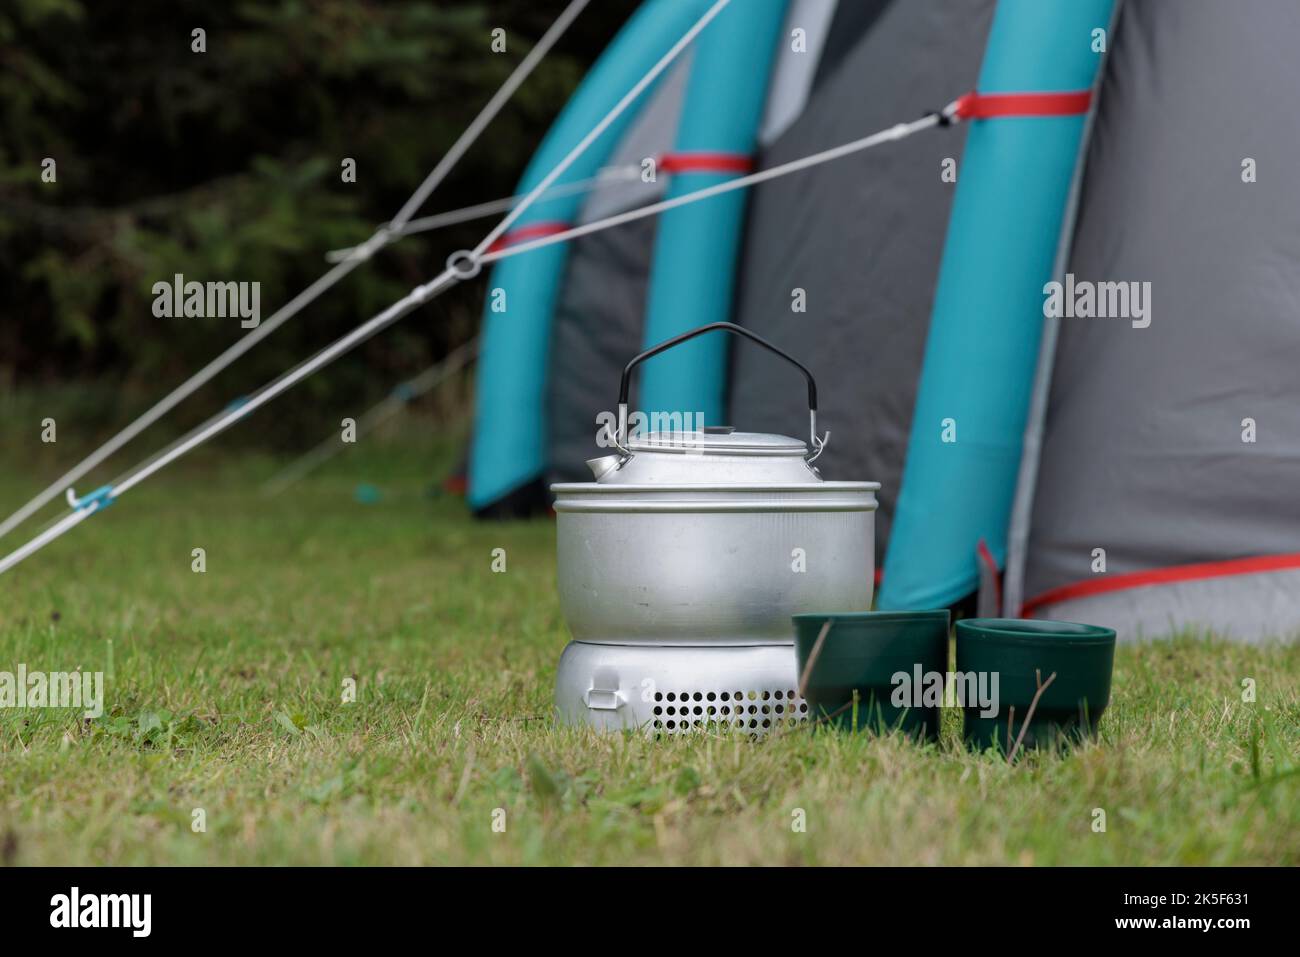 Camp stove, cups and tent. Stock Photo